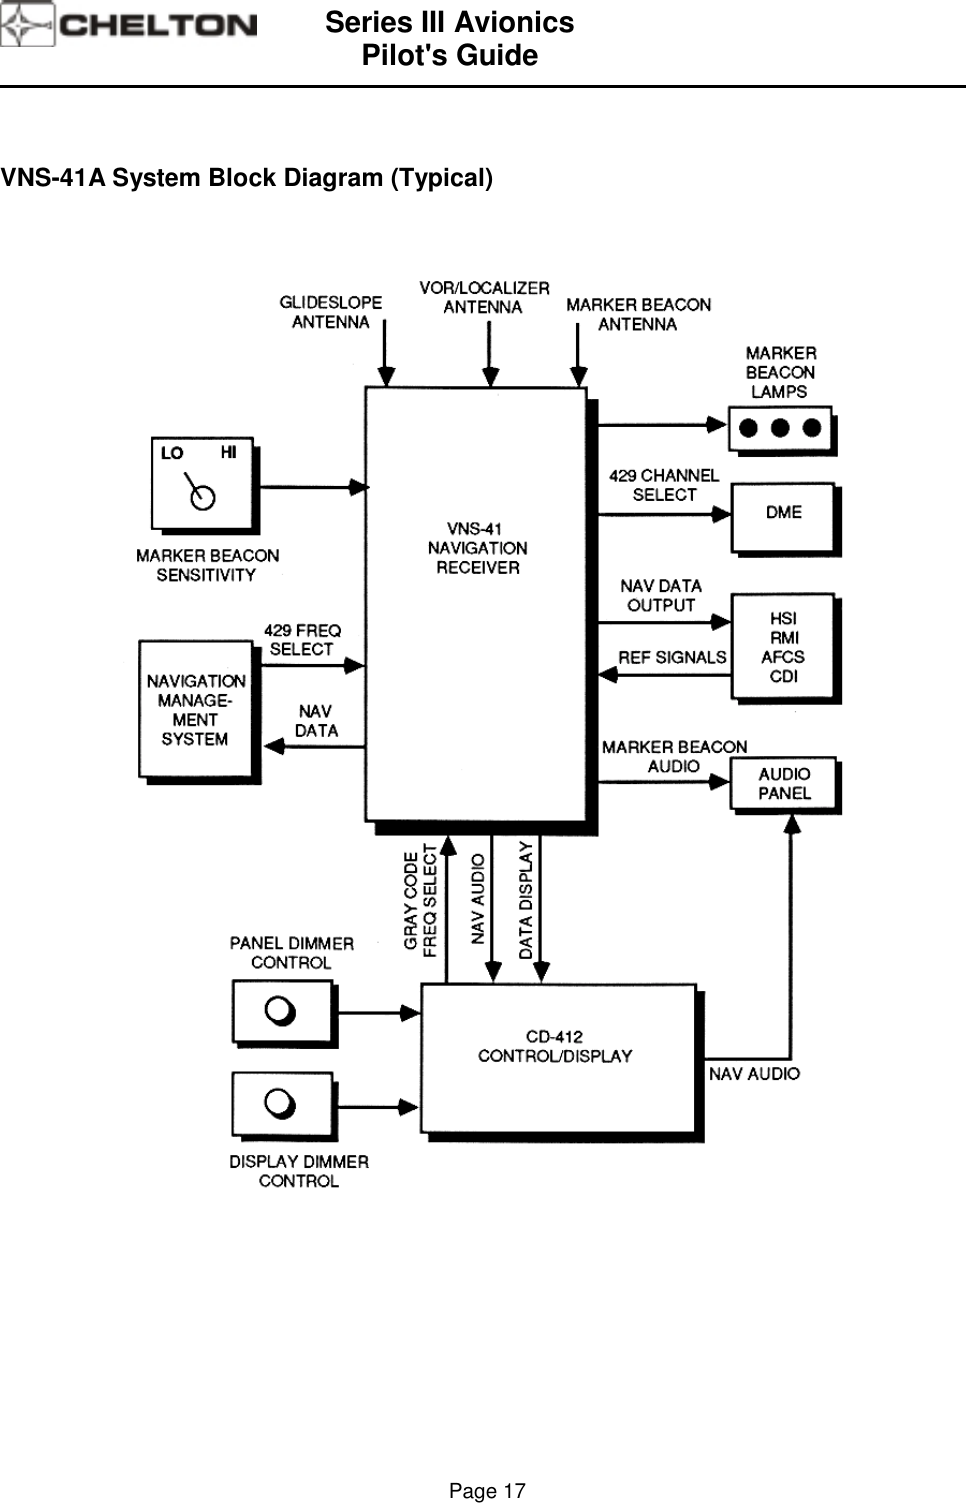 Series III AvionicsPilot&apos;s Guide                                                                                                                                          Page 17VNS-41A System Block Diagram (Typical)